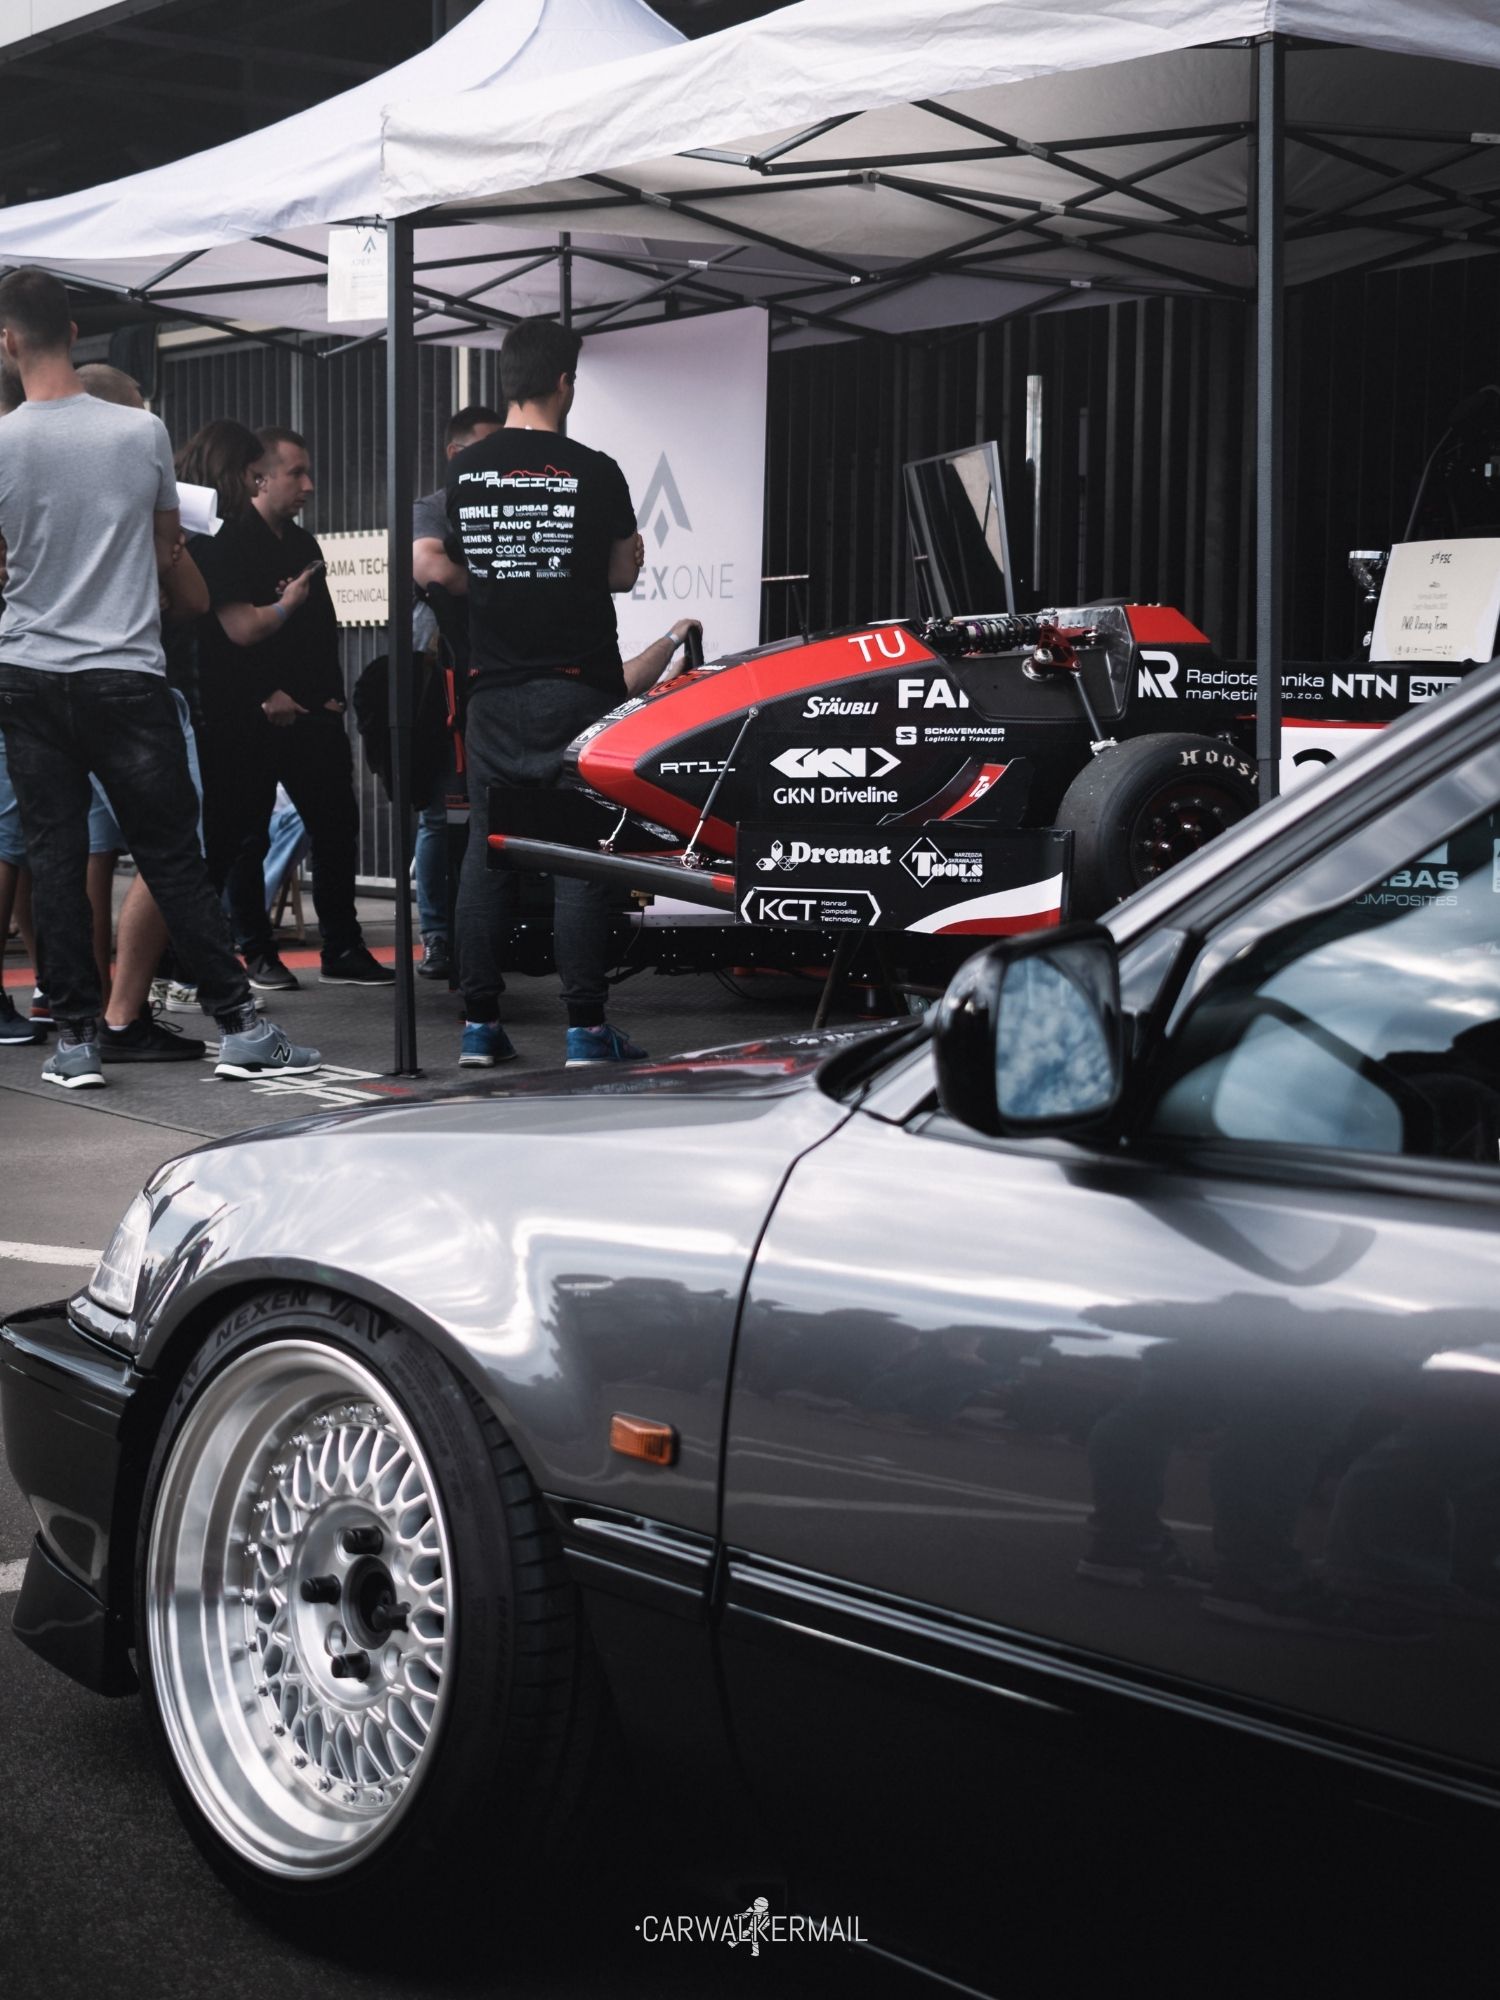 Ultrace 2021 sports car event